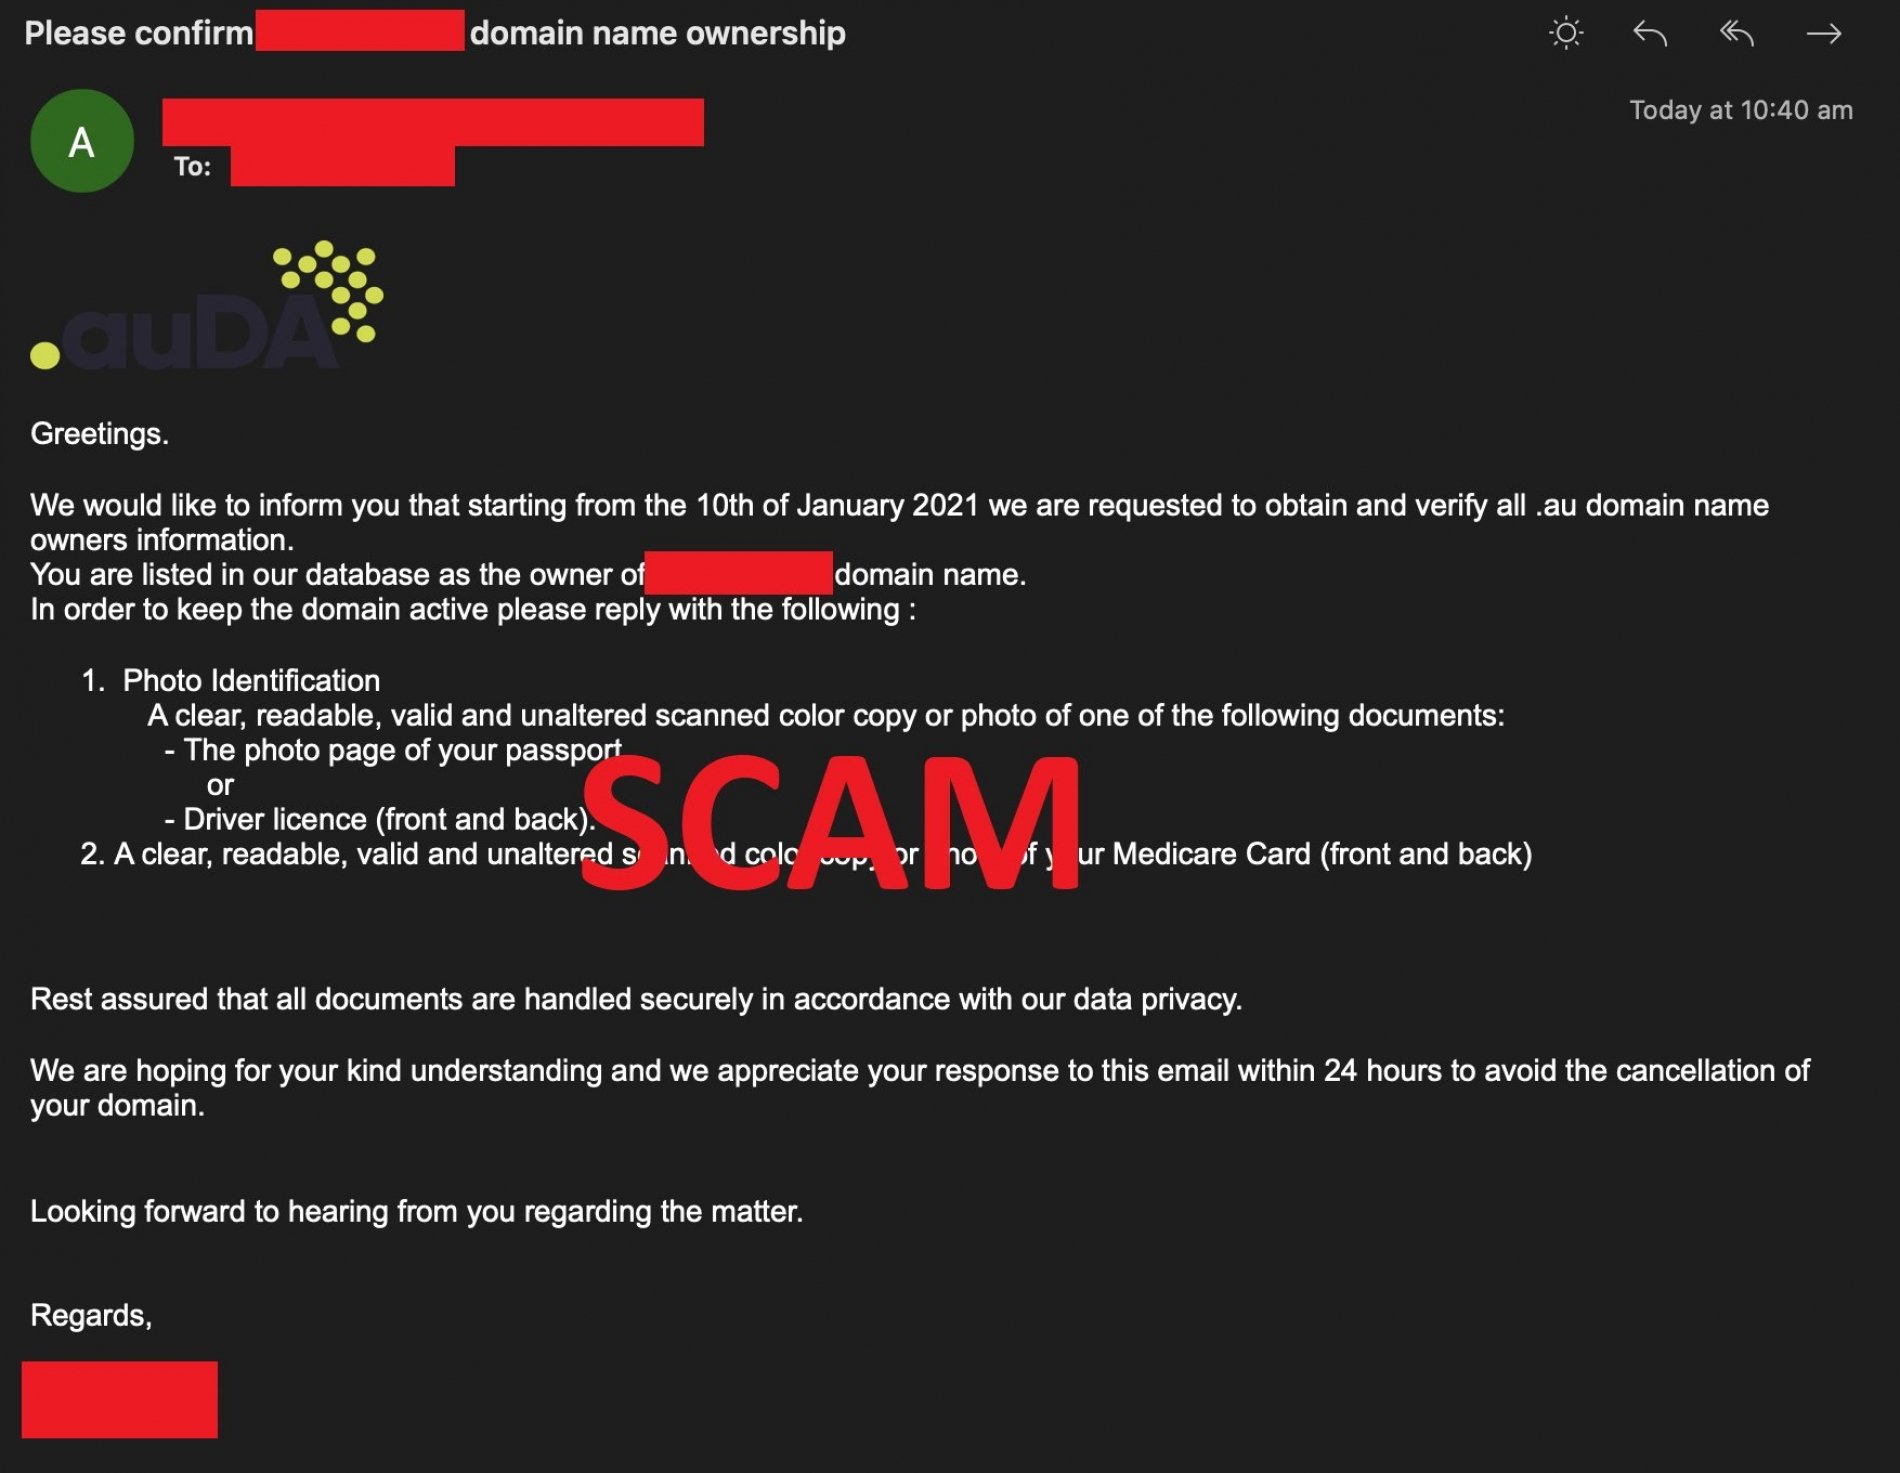 19f9cefdfb07230a68581d617885a3af_L Scammers are impersonating auDA in an email phishing campaign - SenseICT Pty Ltd